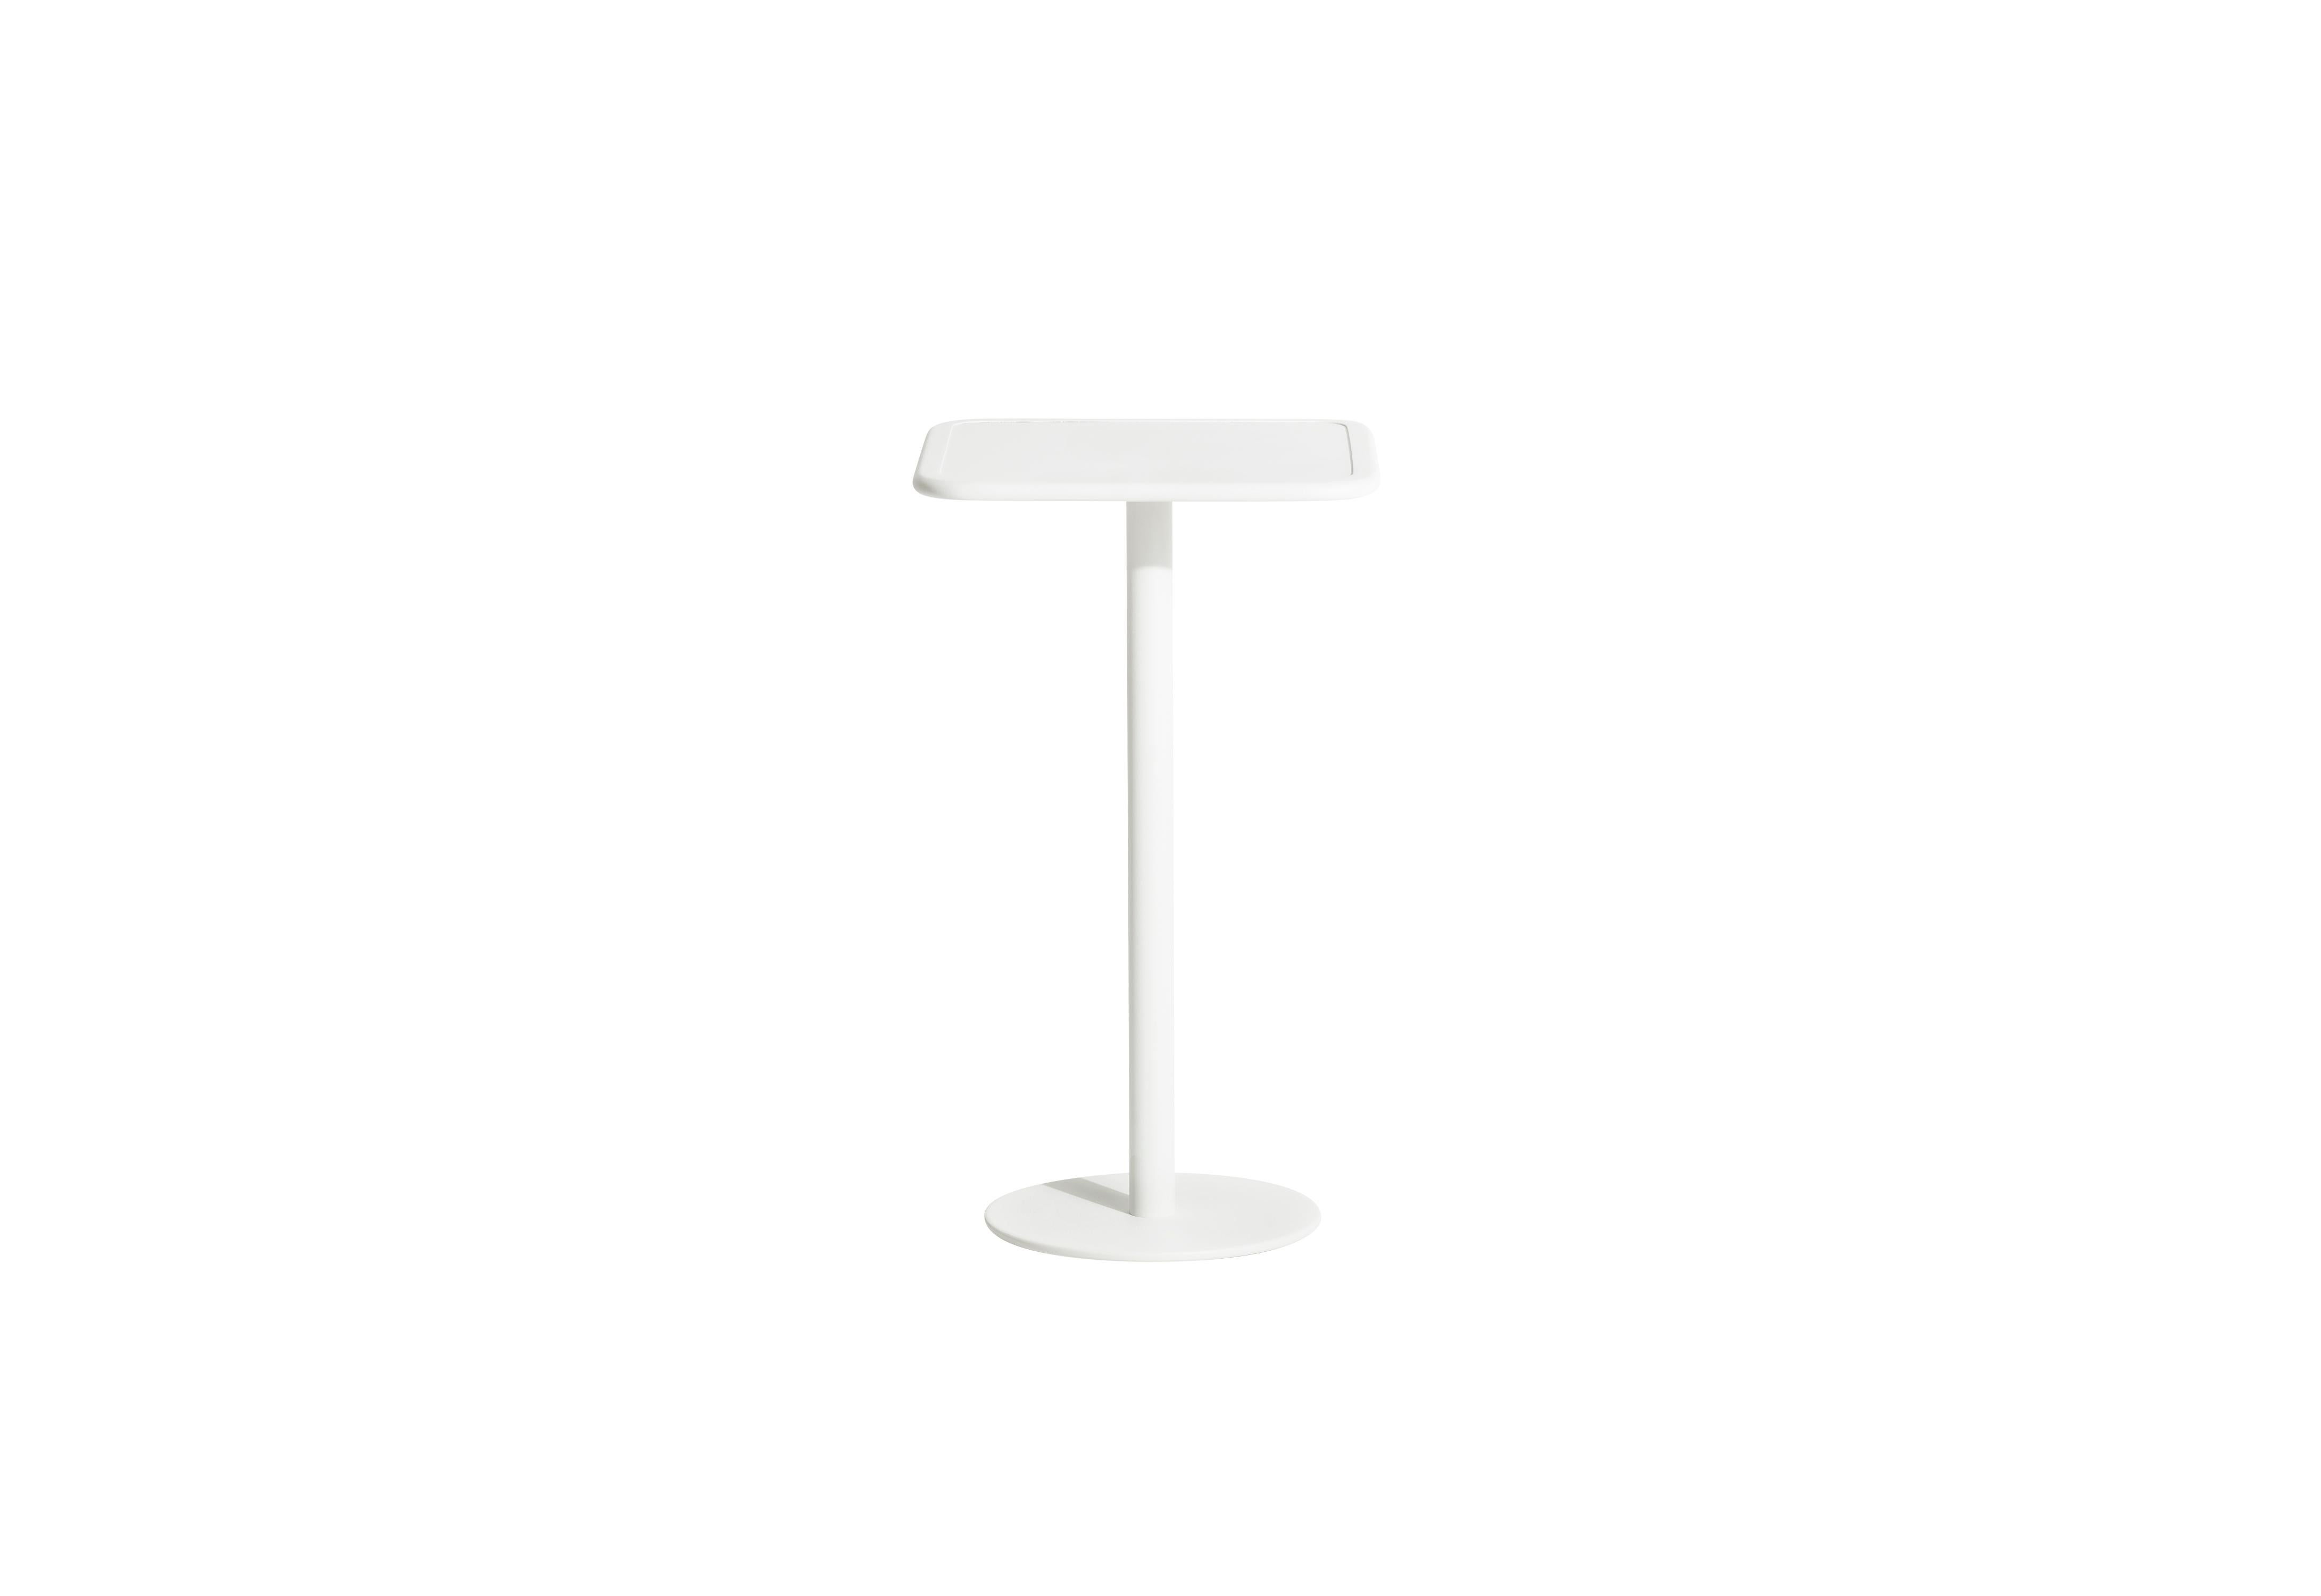 Petite Friture Week-End Square High Table in White Aluminium by Studio BrichetZiegler, 2017

The week-end collection is a full range of outdoor furniture, in aluminium grained epoxy paint, matt finish, that includes 18 functions and 8 colours for